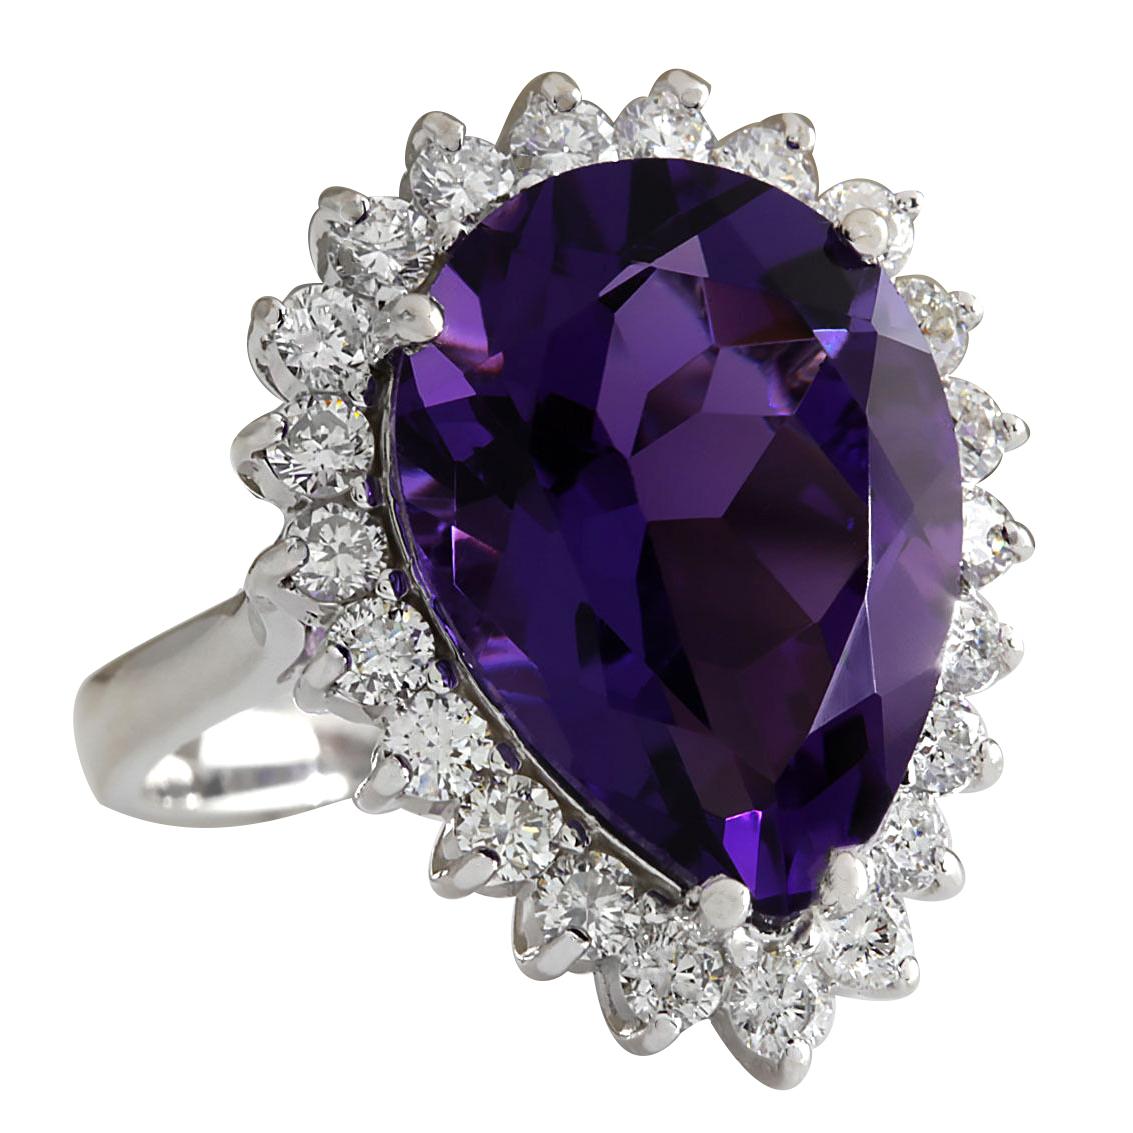 ndulge in the captivating allure of this exquisite 14K white gold diamond ring, showcasing a stunning 10.80 carat natural amethyst. The majestic amethyst, measuring 18.00x13.00 mm and weighing 9.54 carats, radiates a rich purple hue that captures